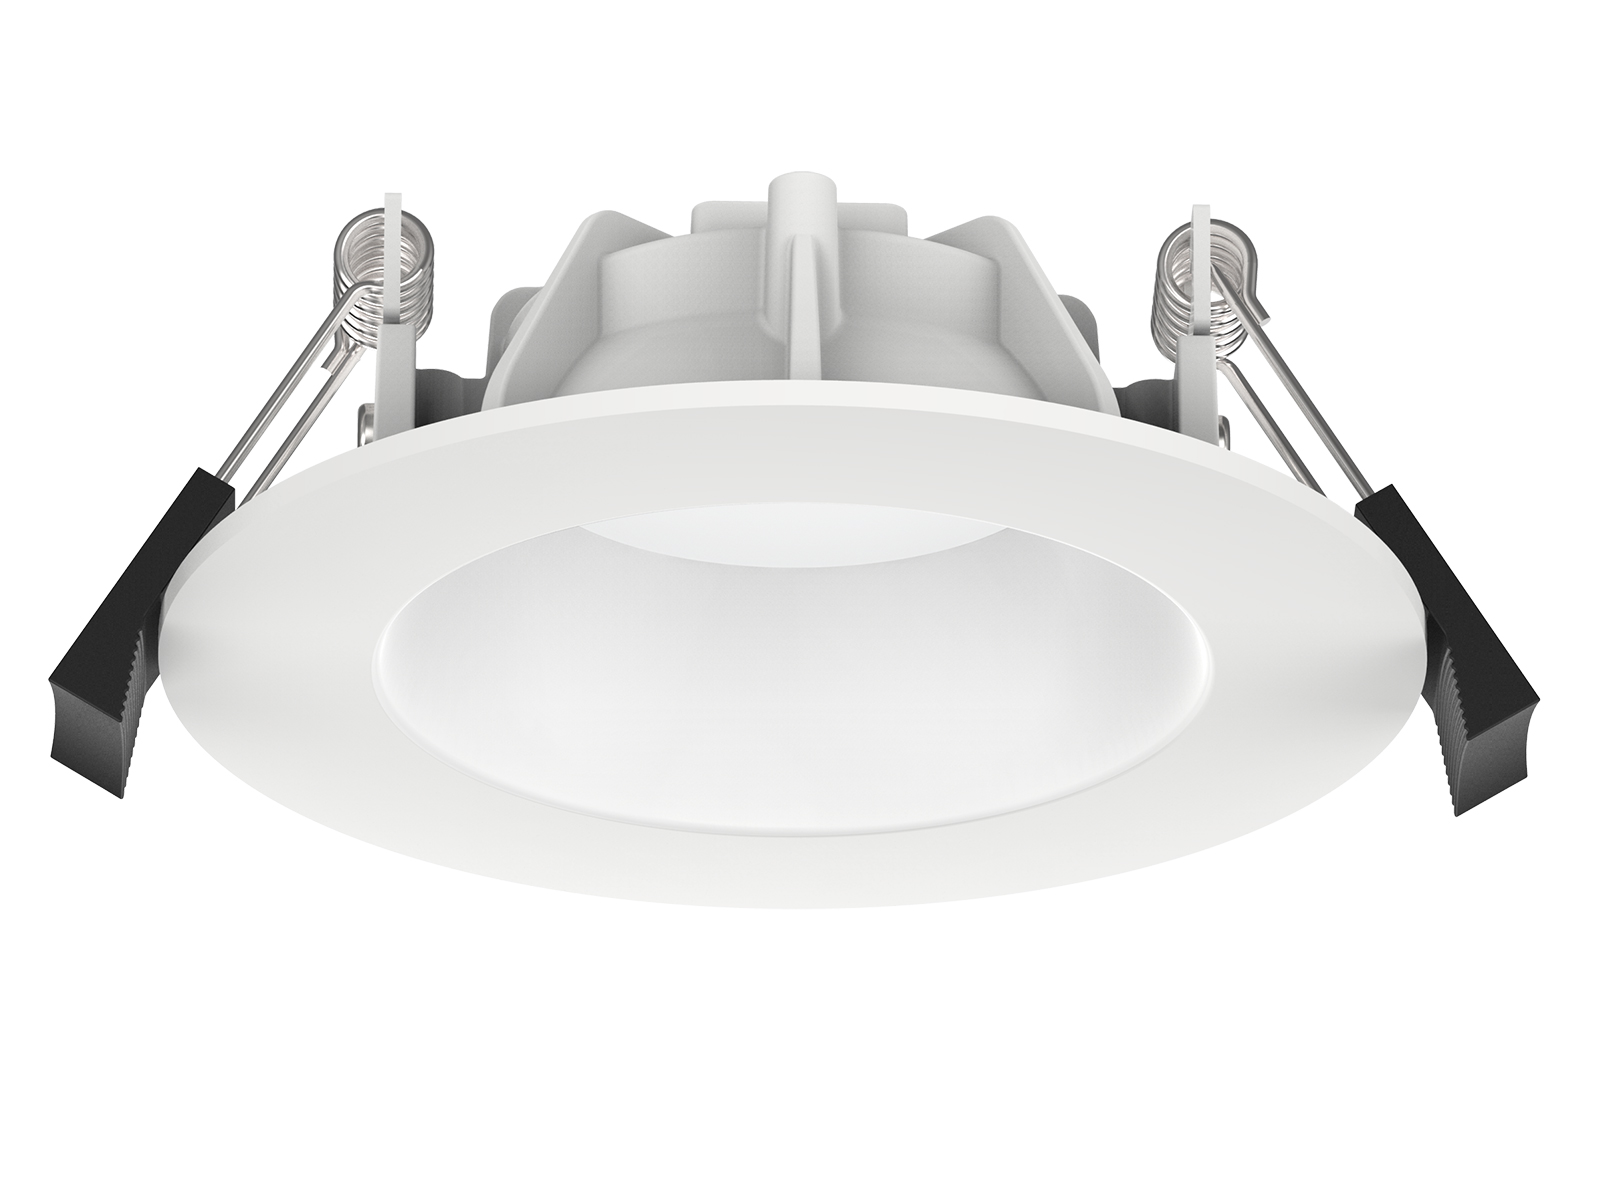 DL216 high quality ceiling mounted downlight